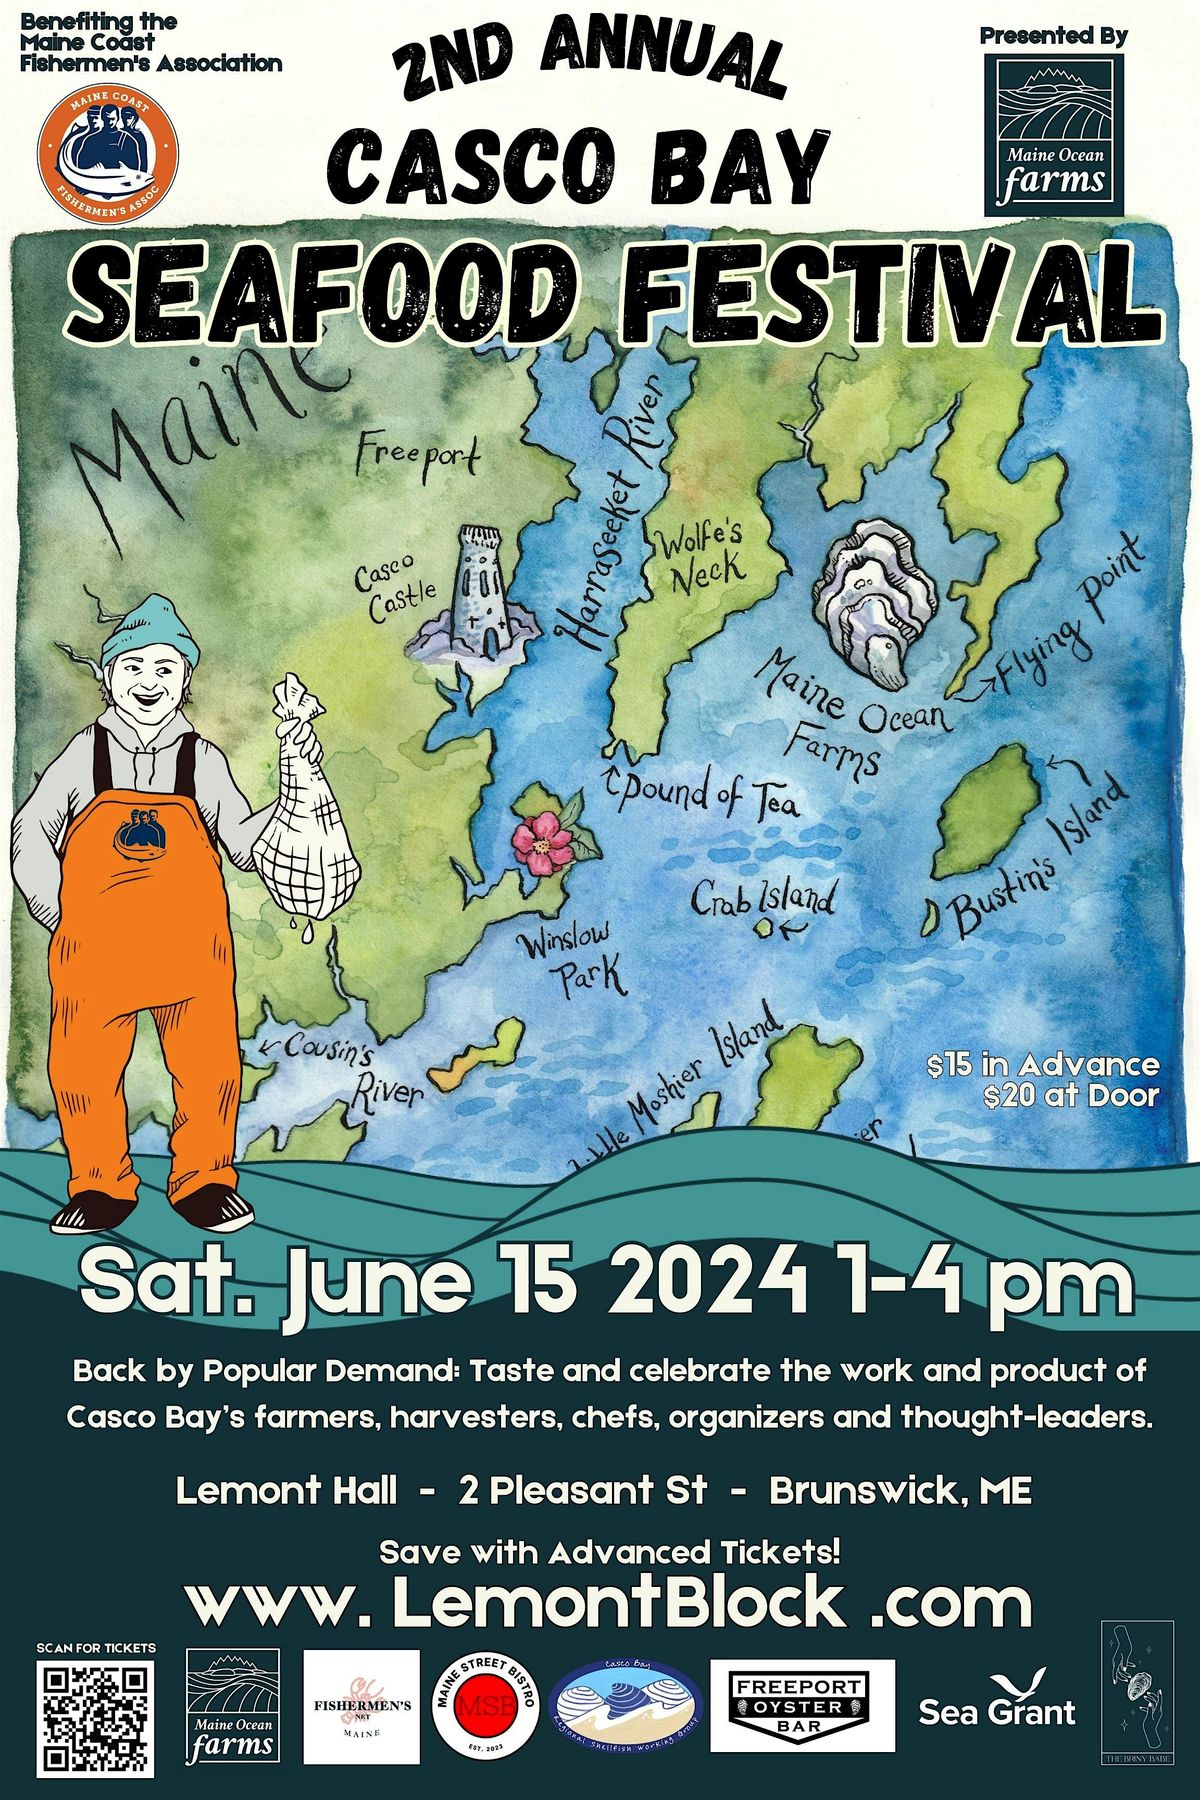 2nd Annual: Casco Bay Seafood Festival to Benefit MCFA